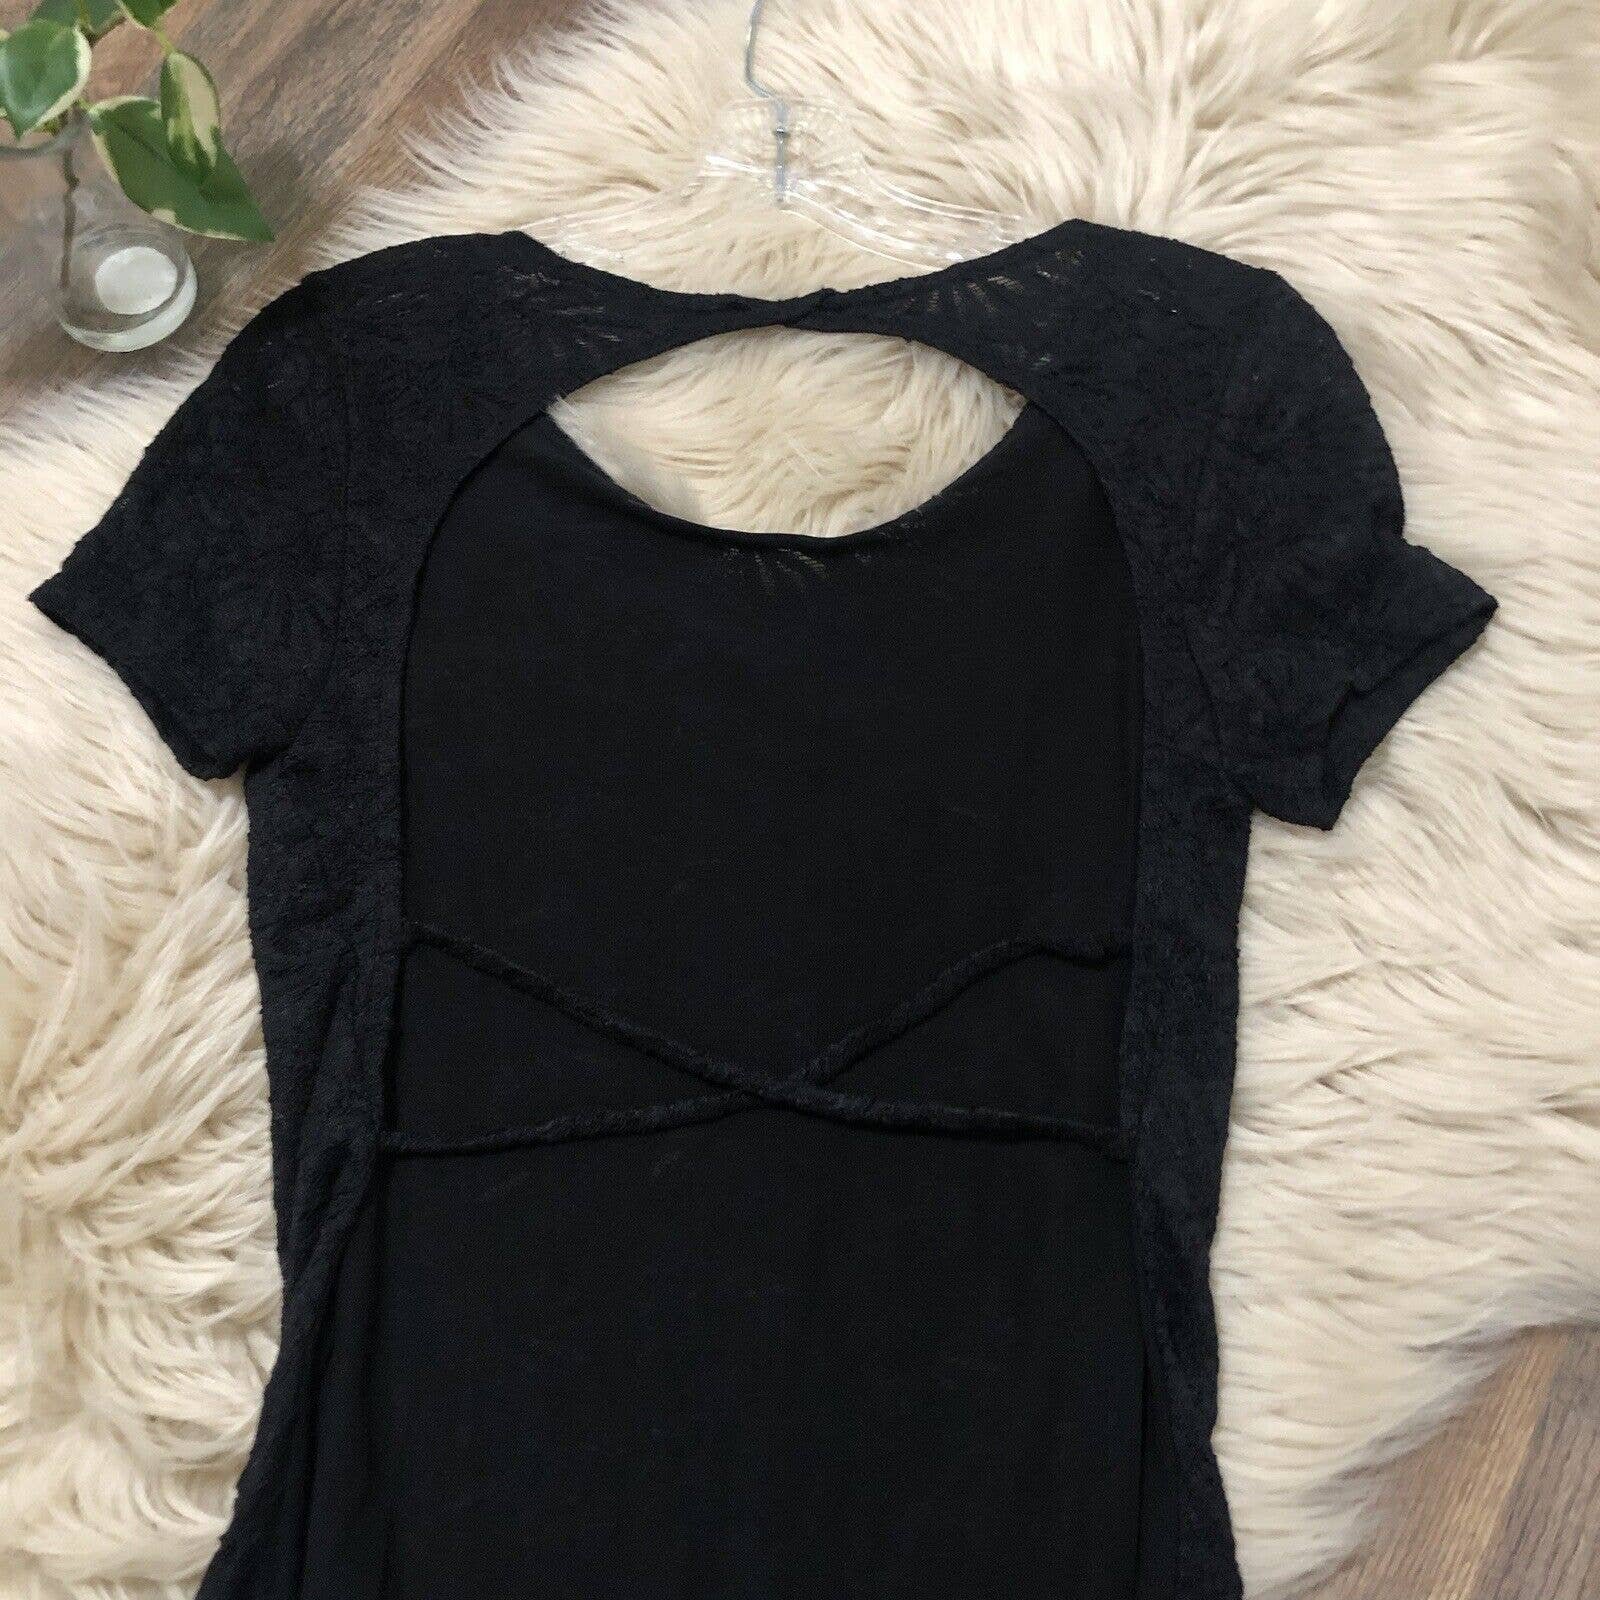 Simple Urban Outfitters Pins & Needles Size Large Black Lace Backless Top NWOT nt45CxBZ7 hot sale